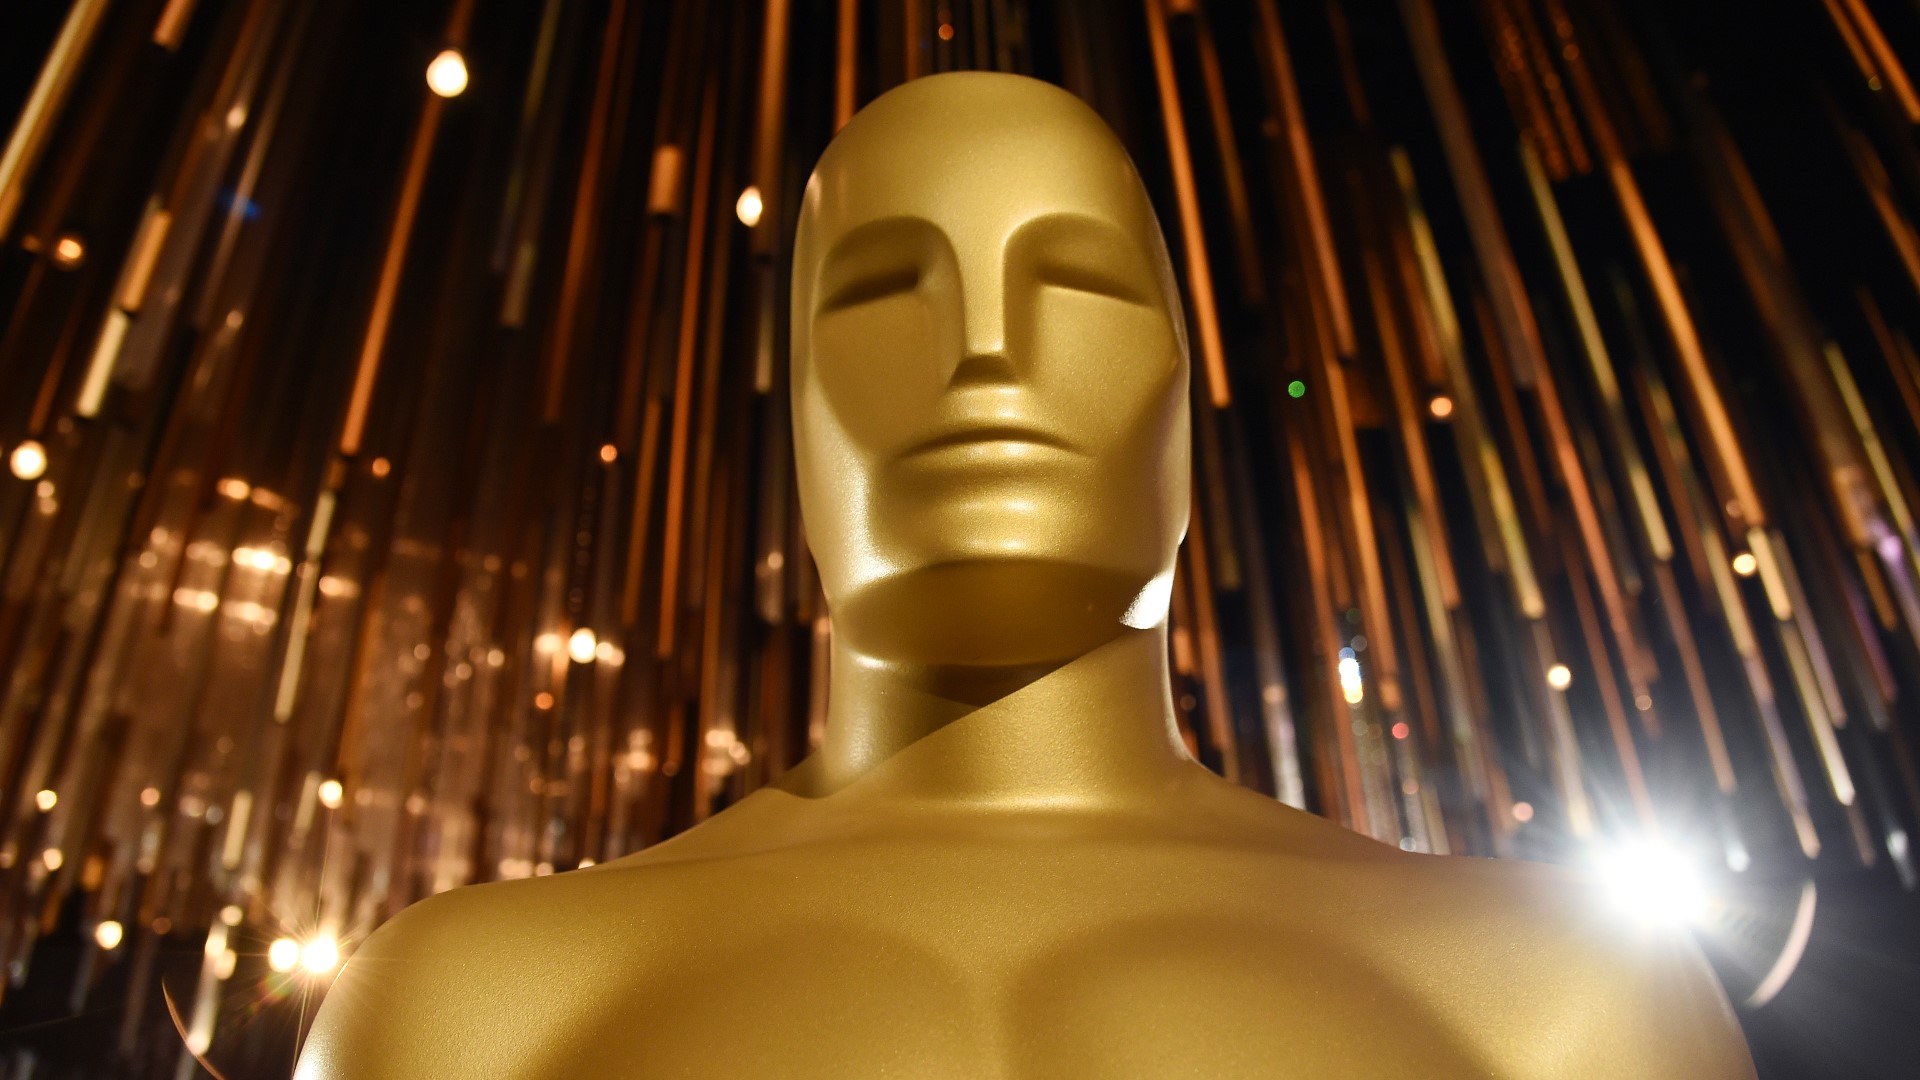 A brief history of Oscar, the Academy Awards statuette